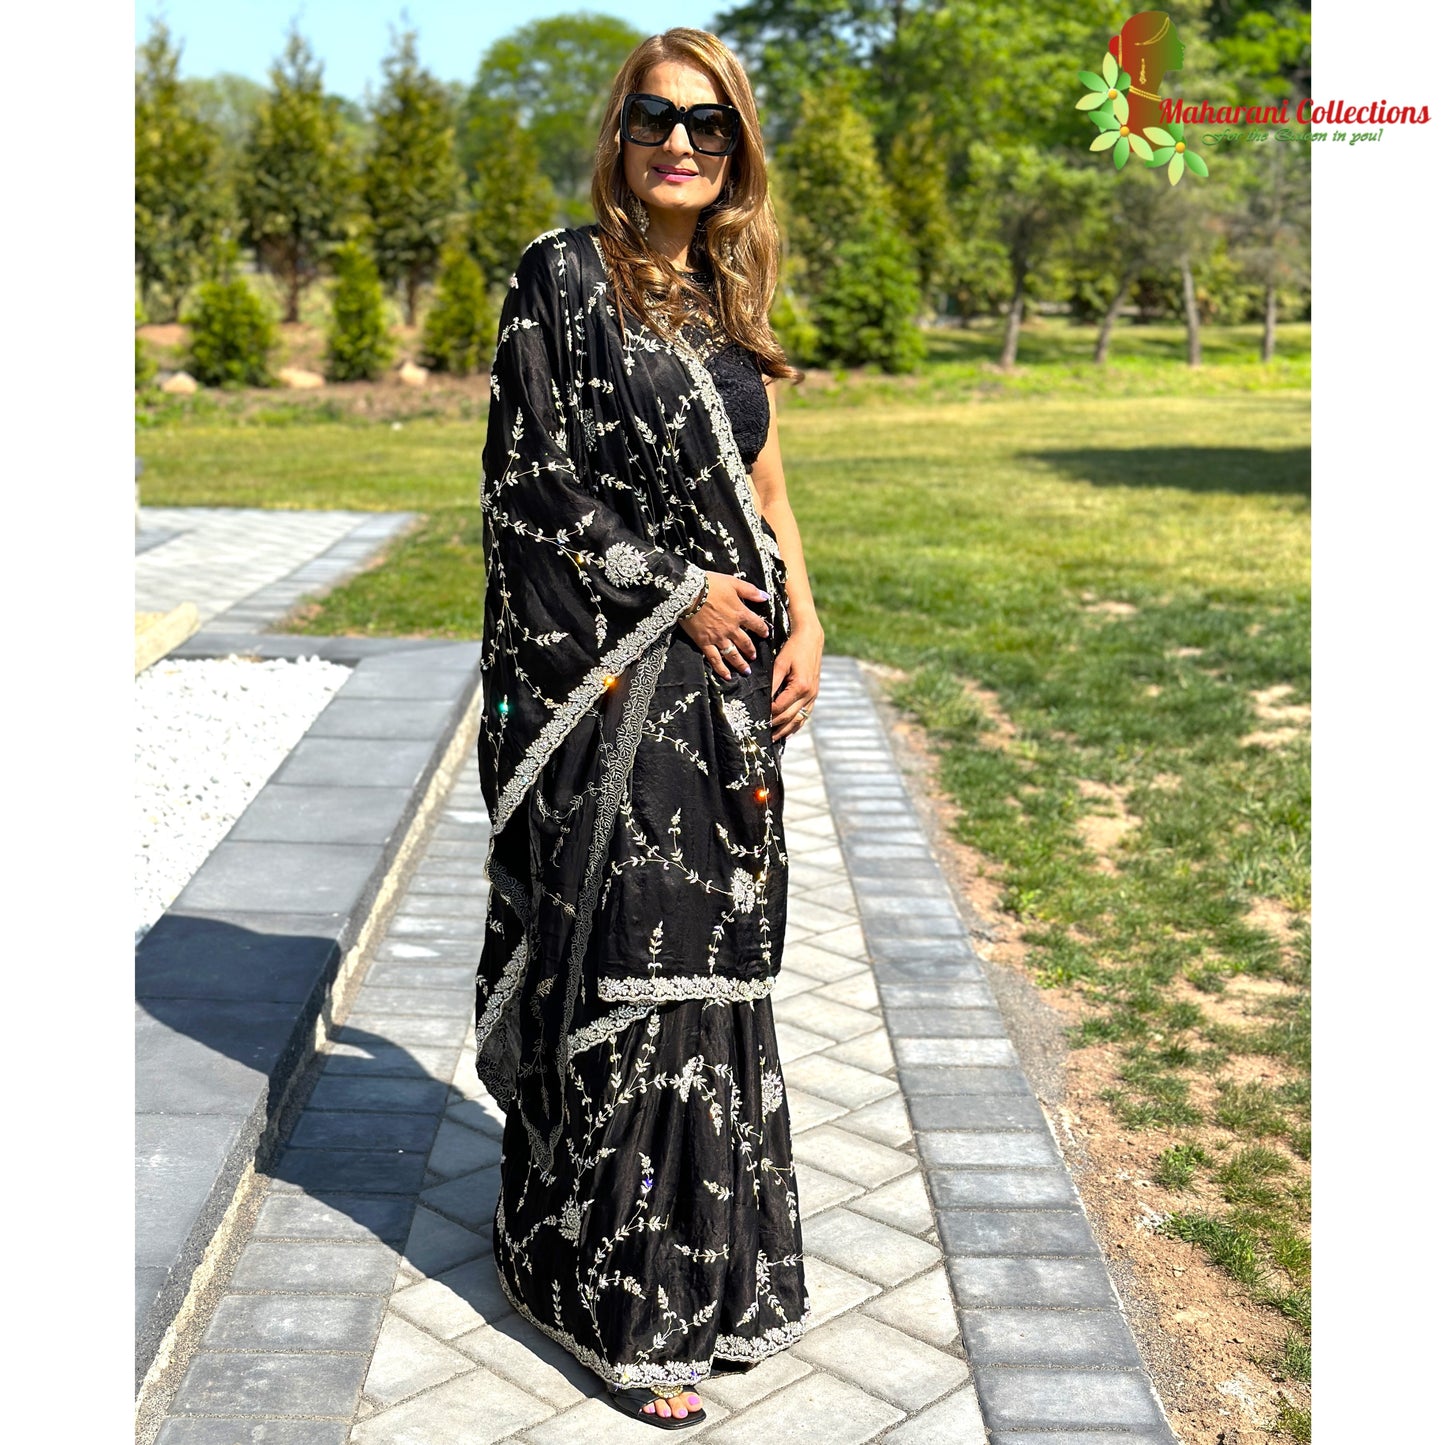 Maharani's Designer Party Wear Georgette Saree - Black (with Stitched Petticoat)